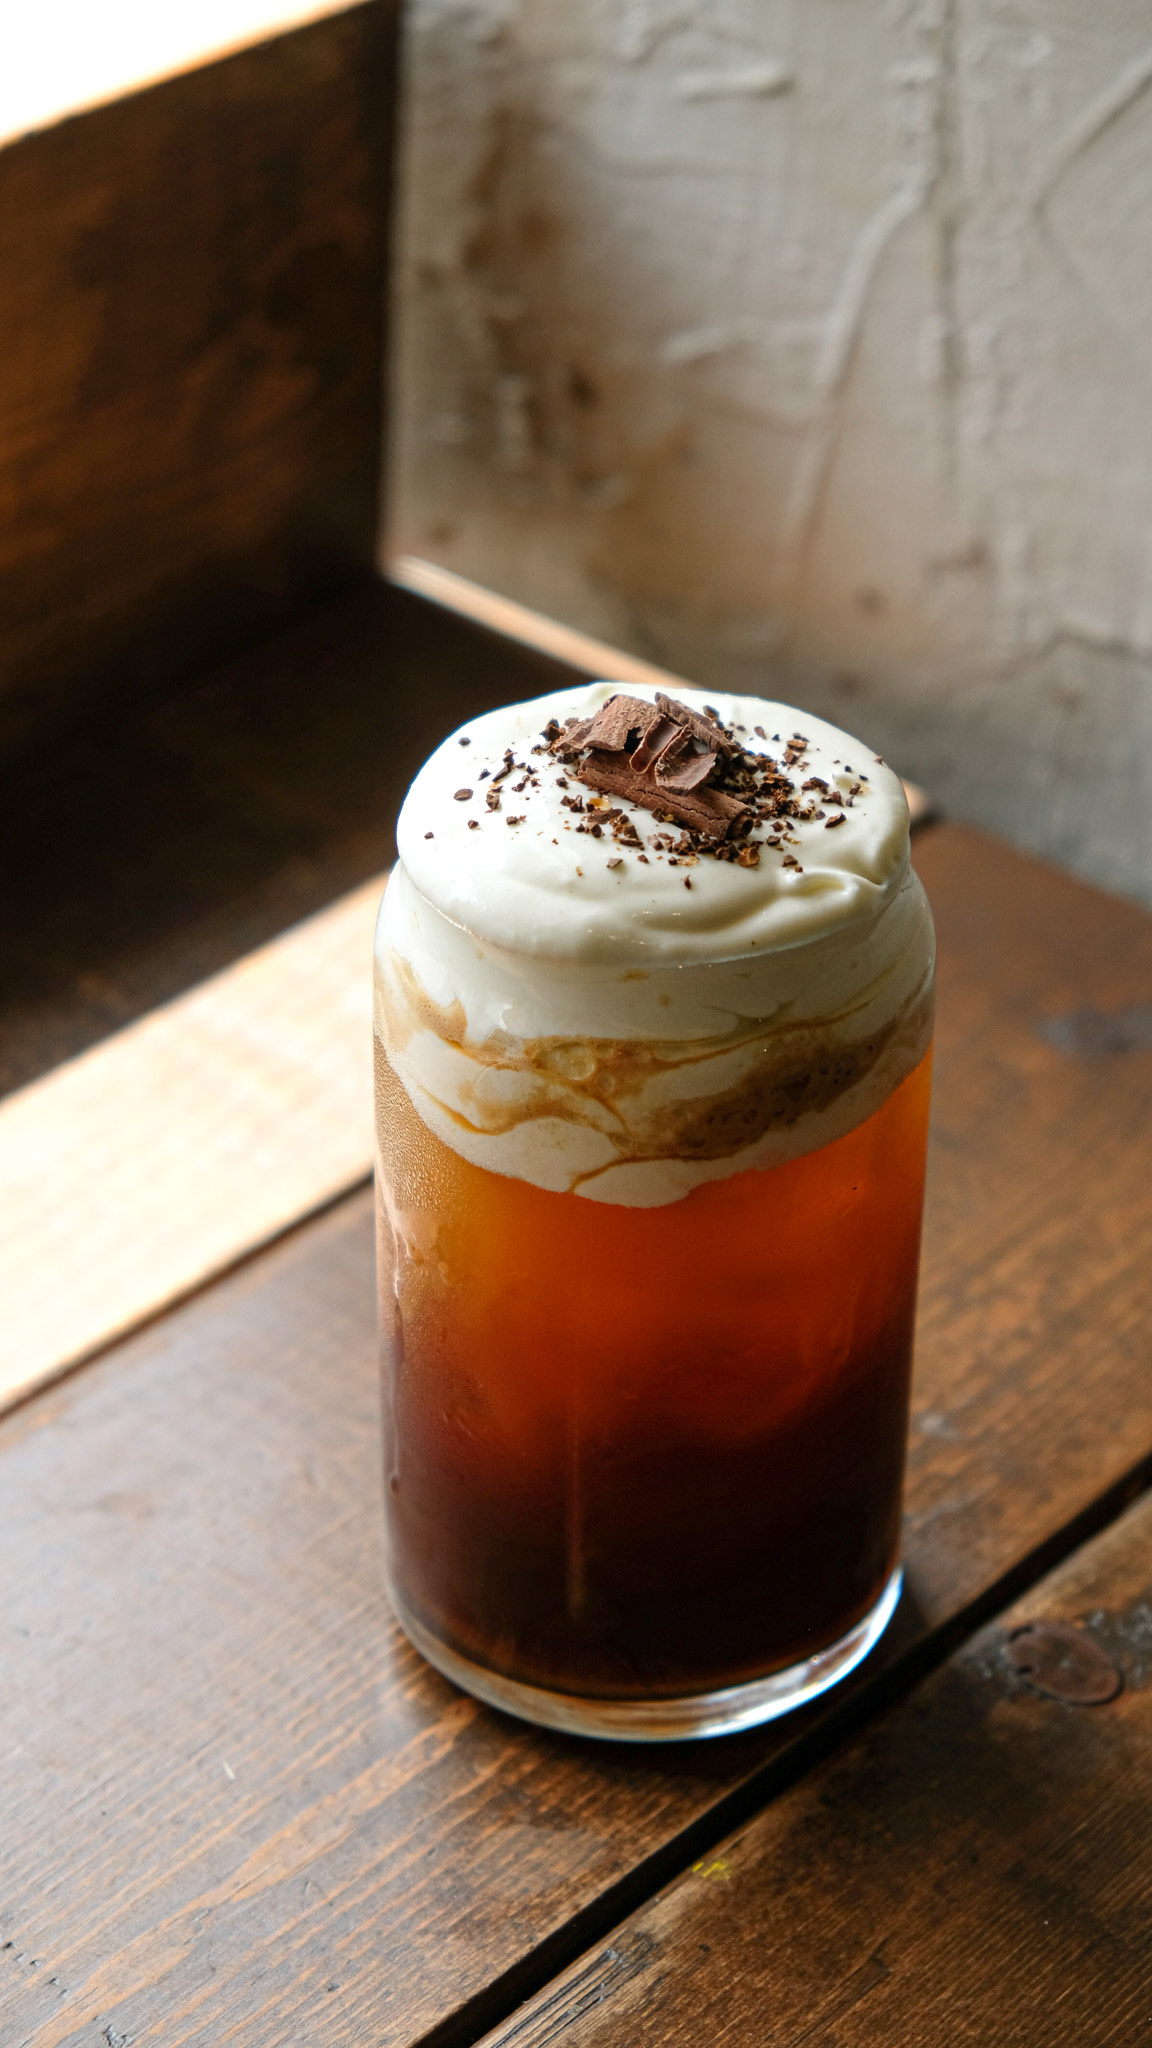 But it's the signature "coffee temptations" that make The Black Bean stand out, like this iced black topped with cream cheese foam called Hey Love!